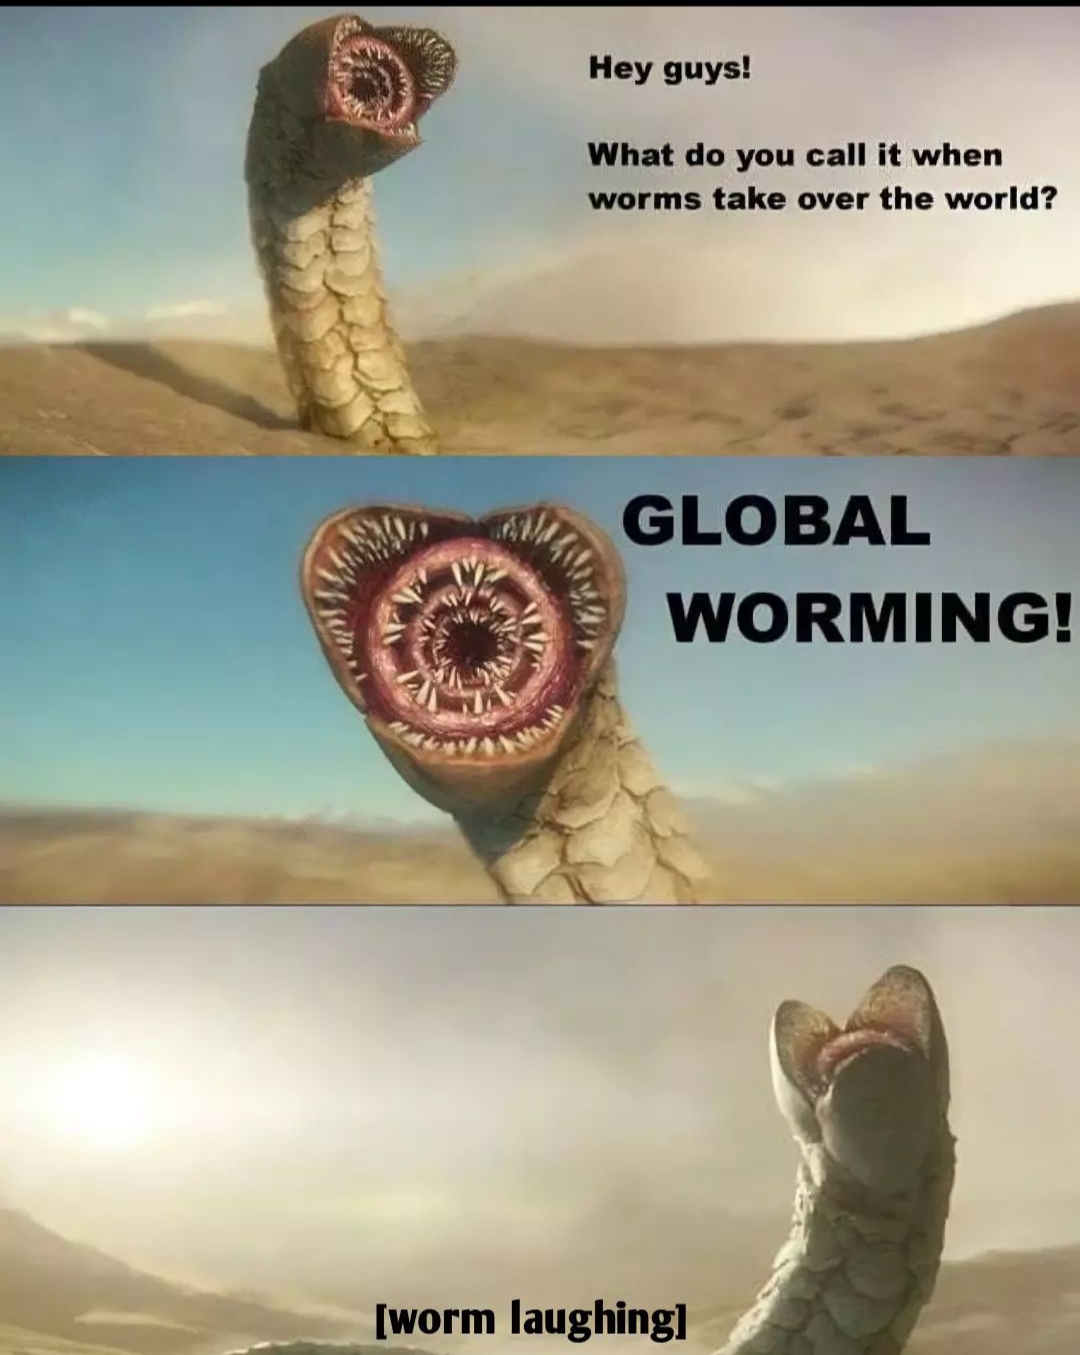 poster - Hey guys! What do you call it when worms take over the world? Global Worming! worm laughing